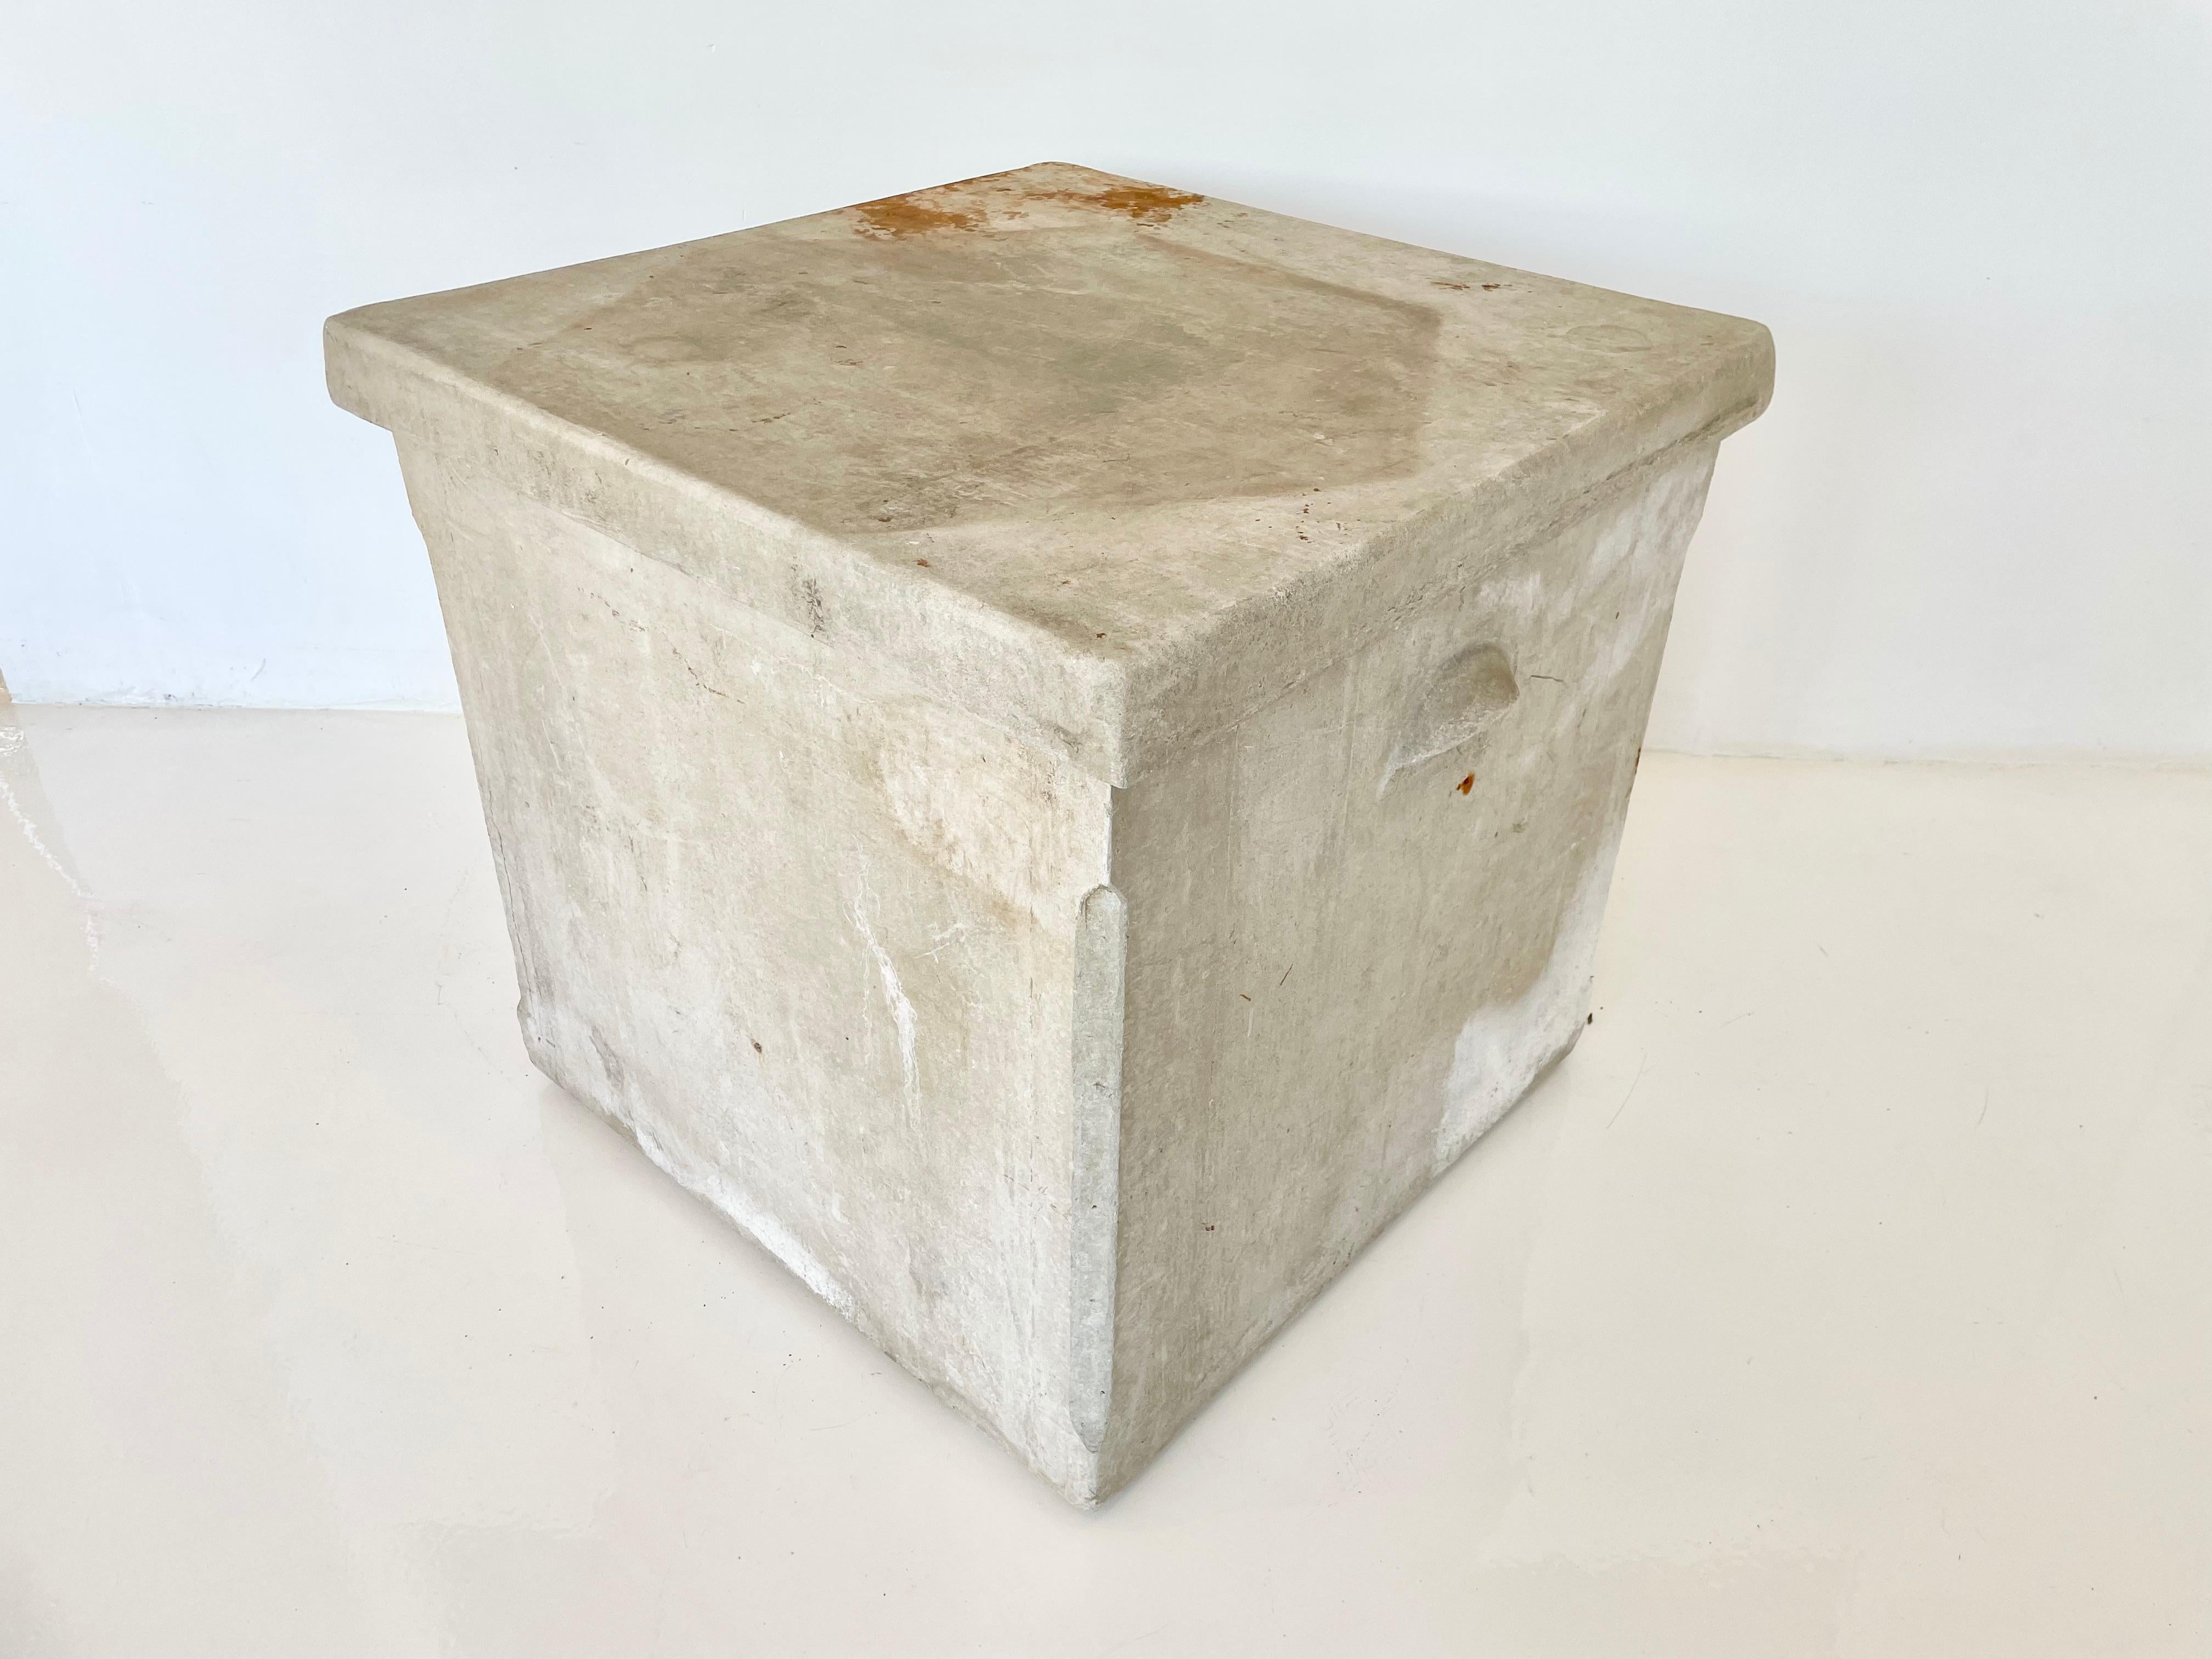 Cement Willy Guhl Concrete Box with Lid, 1960s Switzerland For Sale